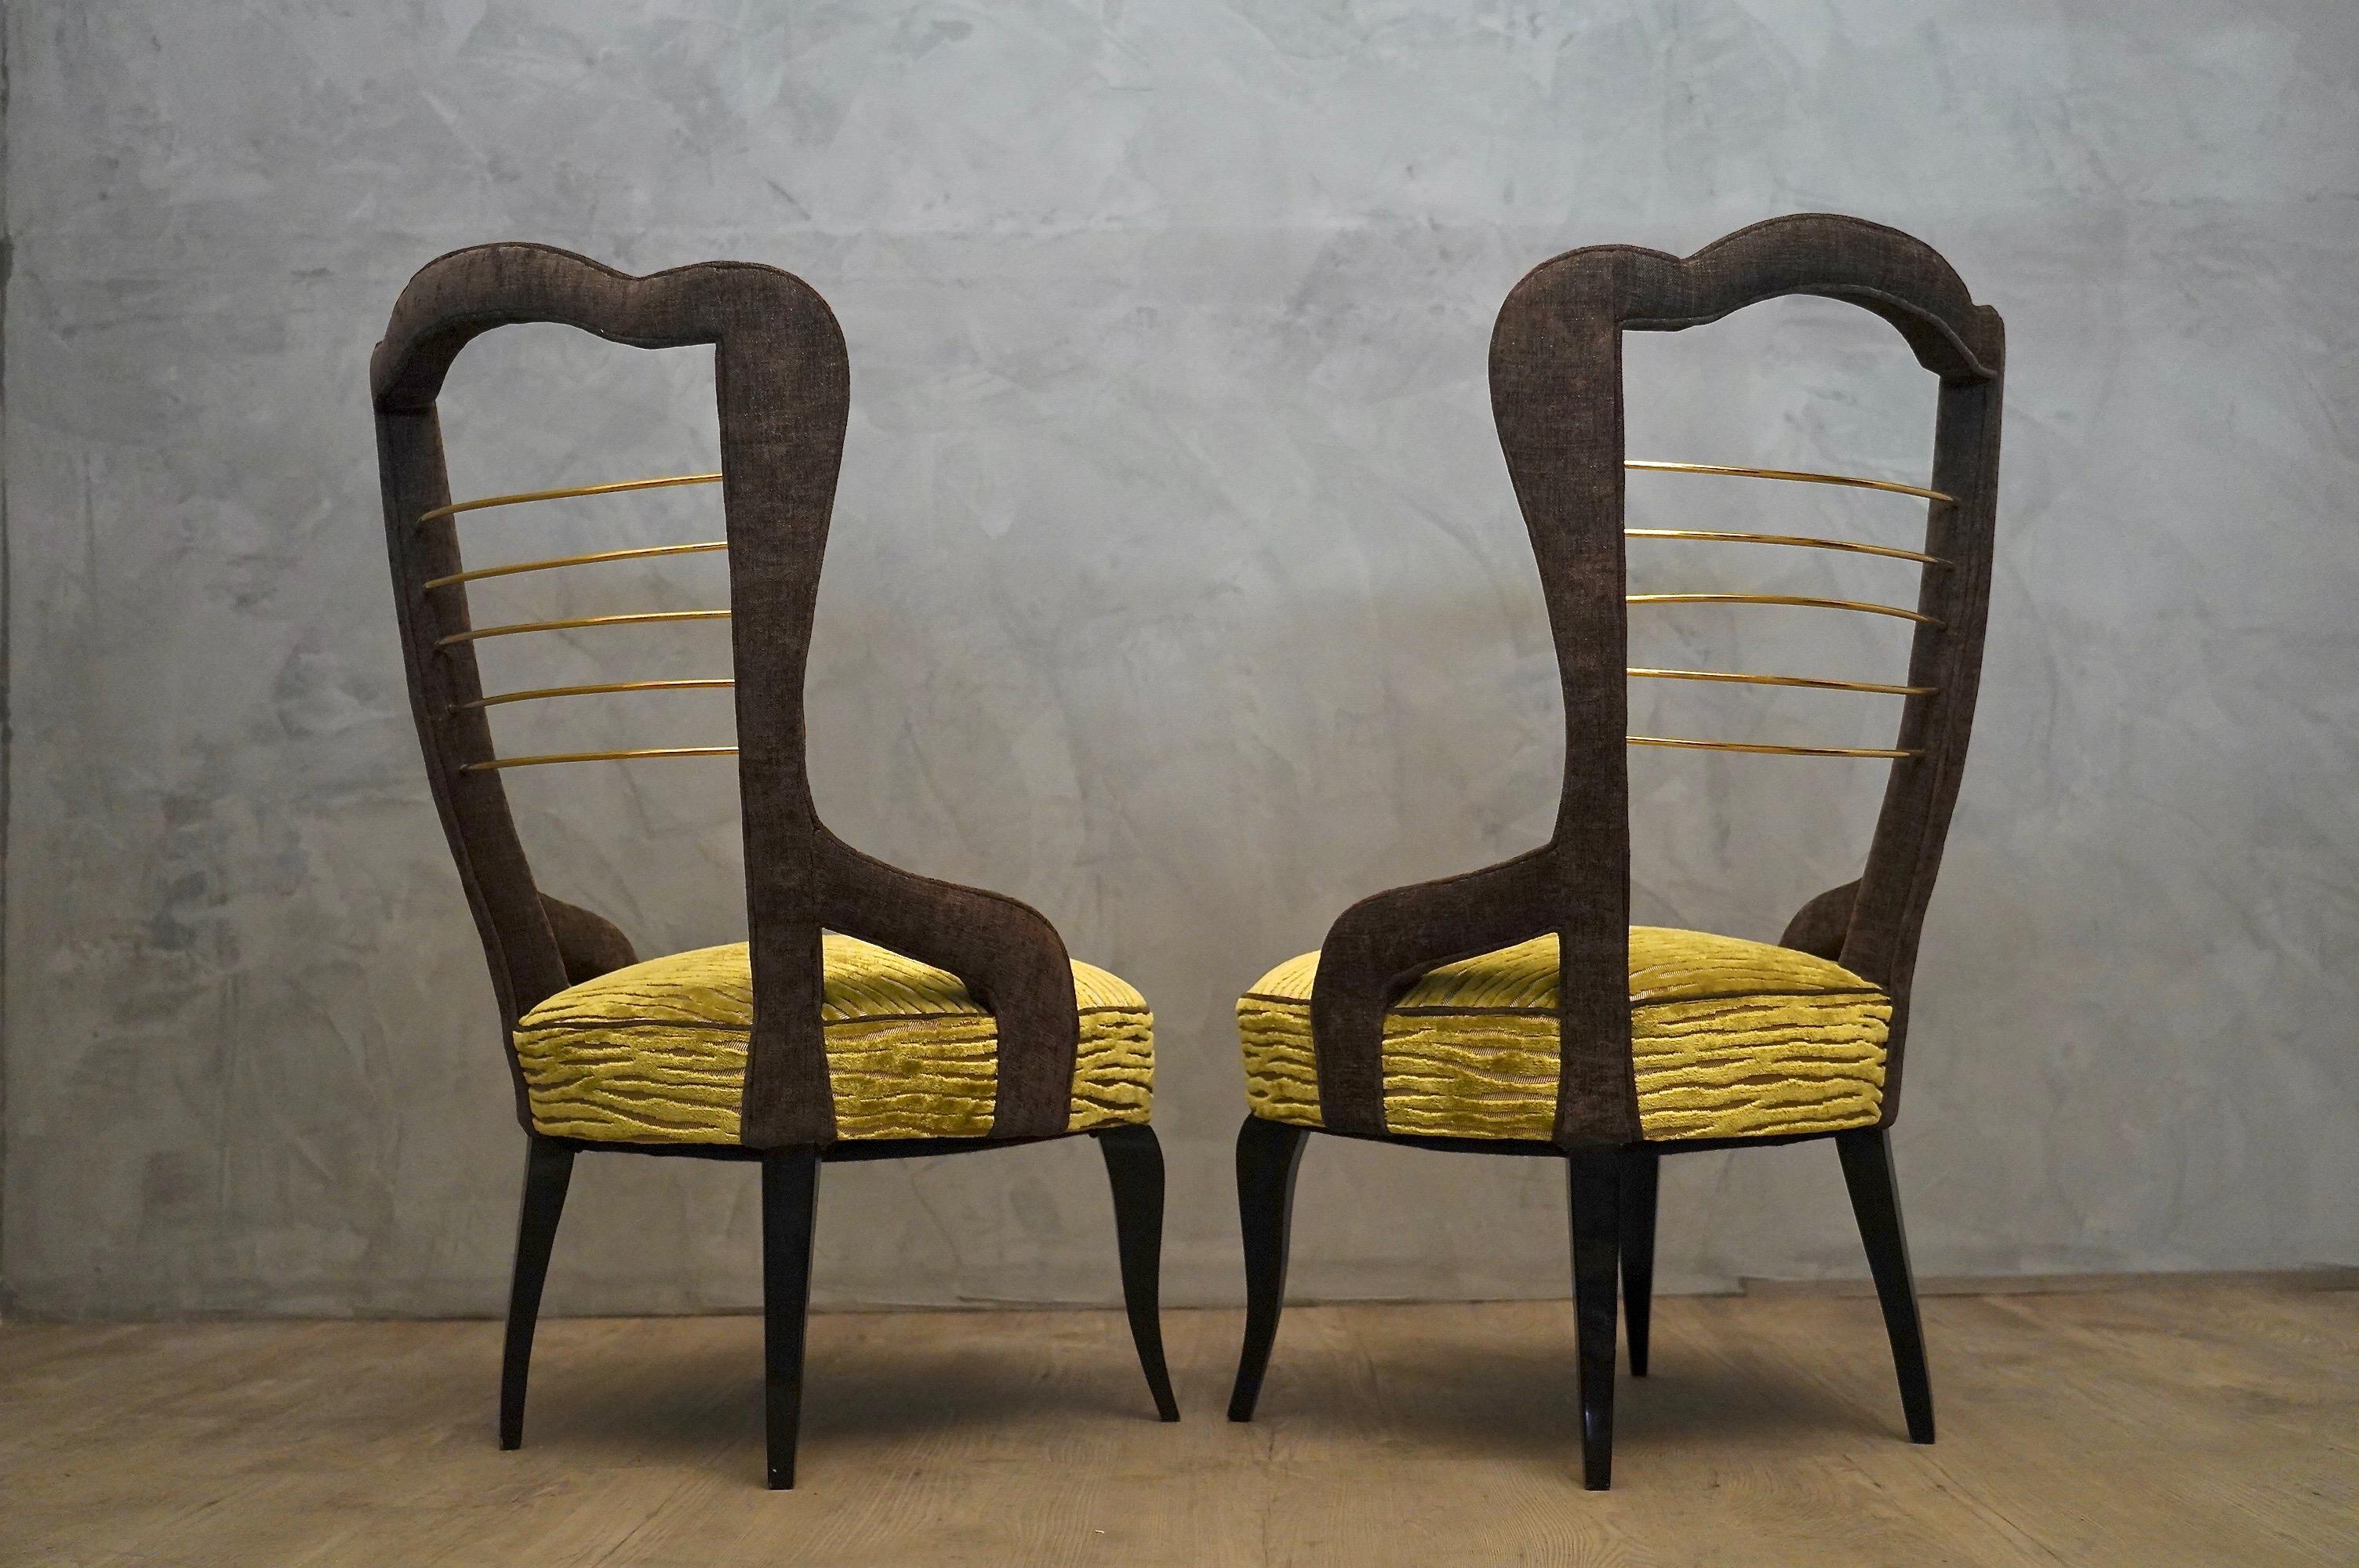 A couple of chic and loving room armchairs. Valuable their shape and the combination of the precious fabrics used to cover them. They can find more locations in your home due to their soft and simple style, yet very elegant.

Wooden frame completely